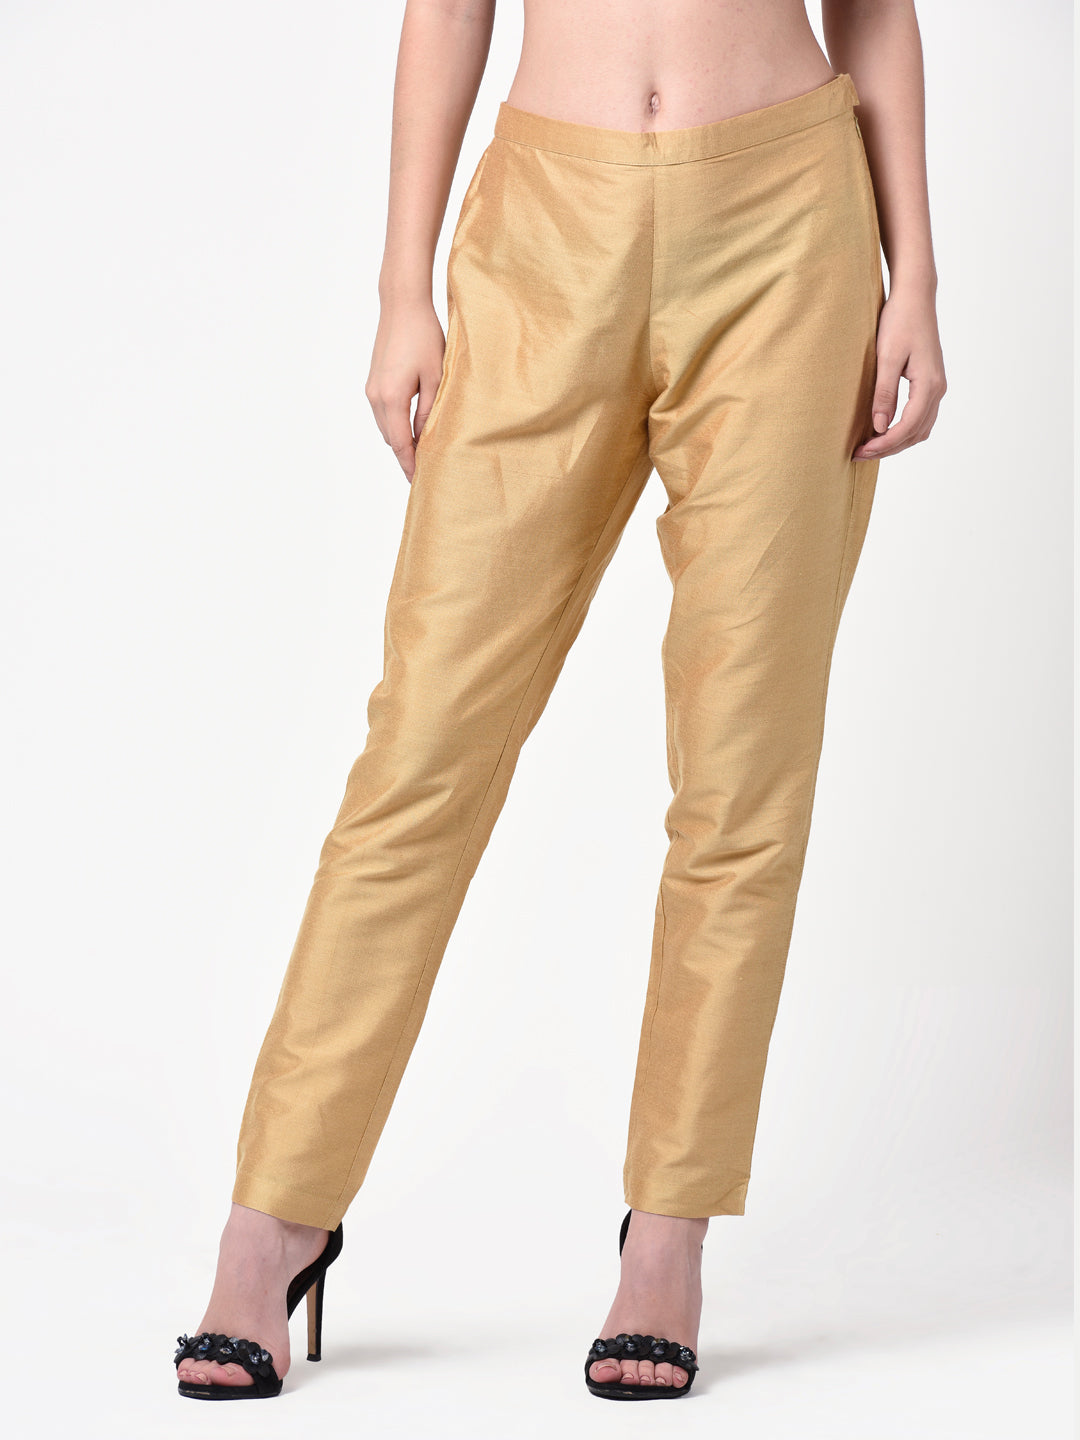 Buy Golden Ankle Pant Cotton Silk for Best Price Reviews Free Shipping